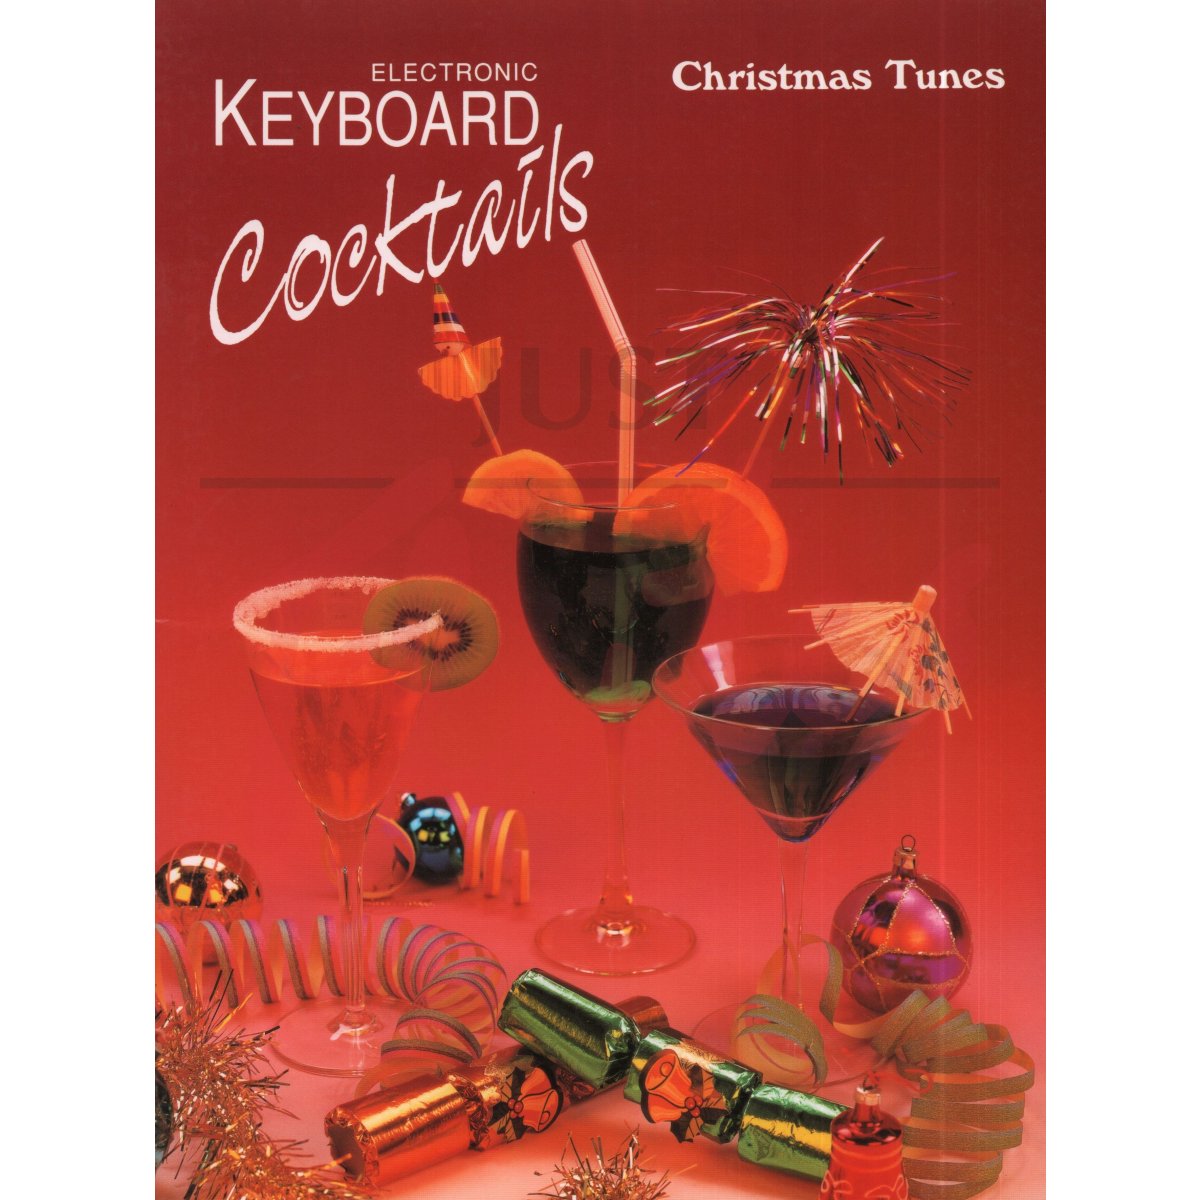 Keyboard Cocktails - Christmas Tunes for Electronic Keyboard